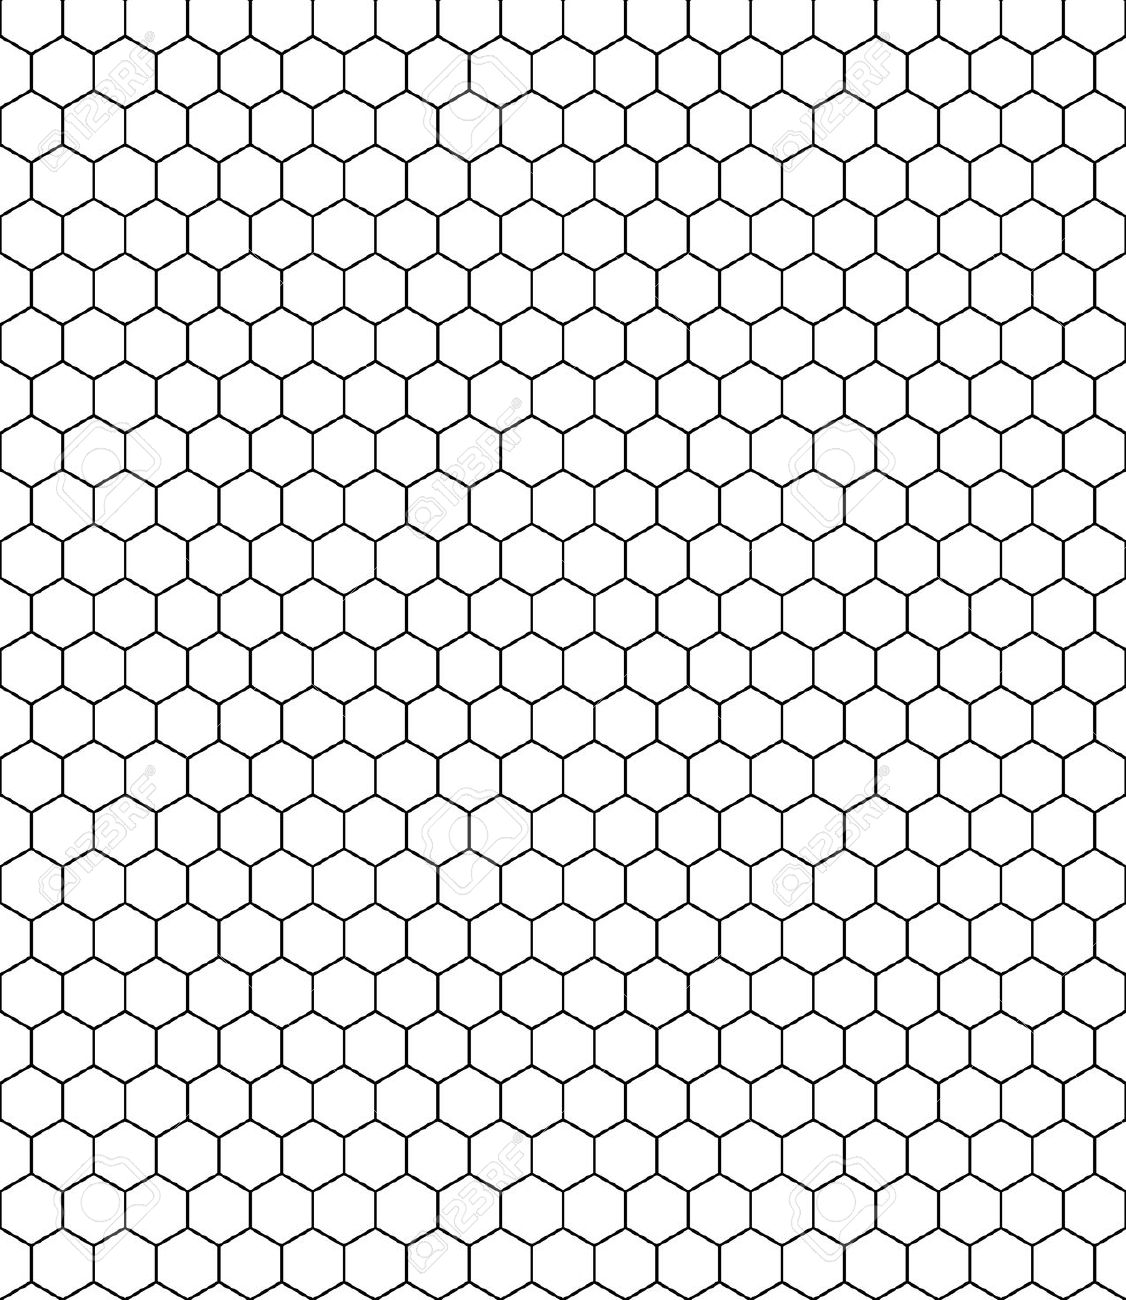 Honeycomb clipart black and white